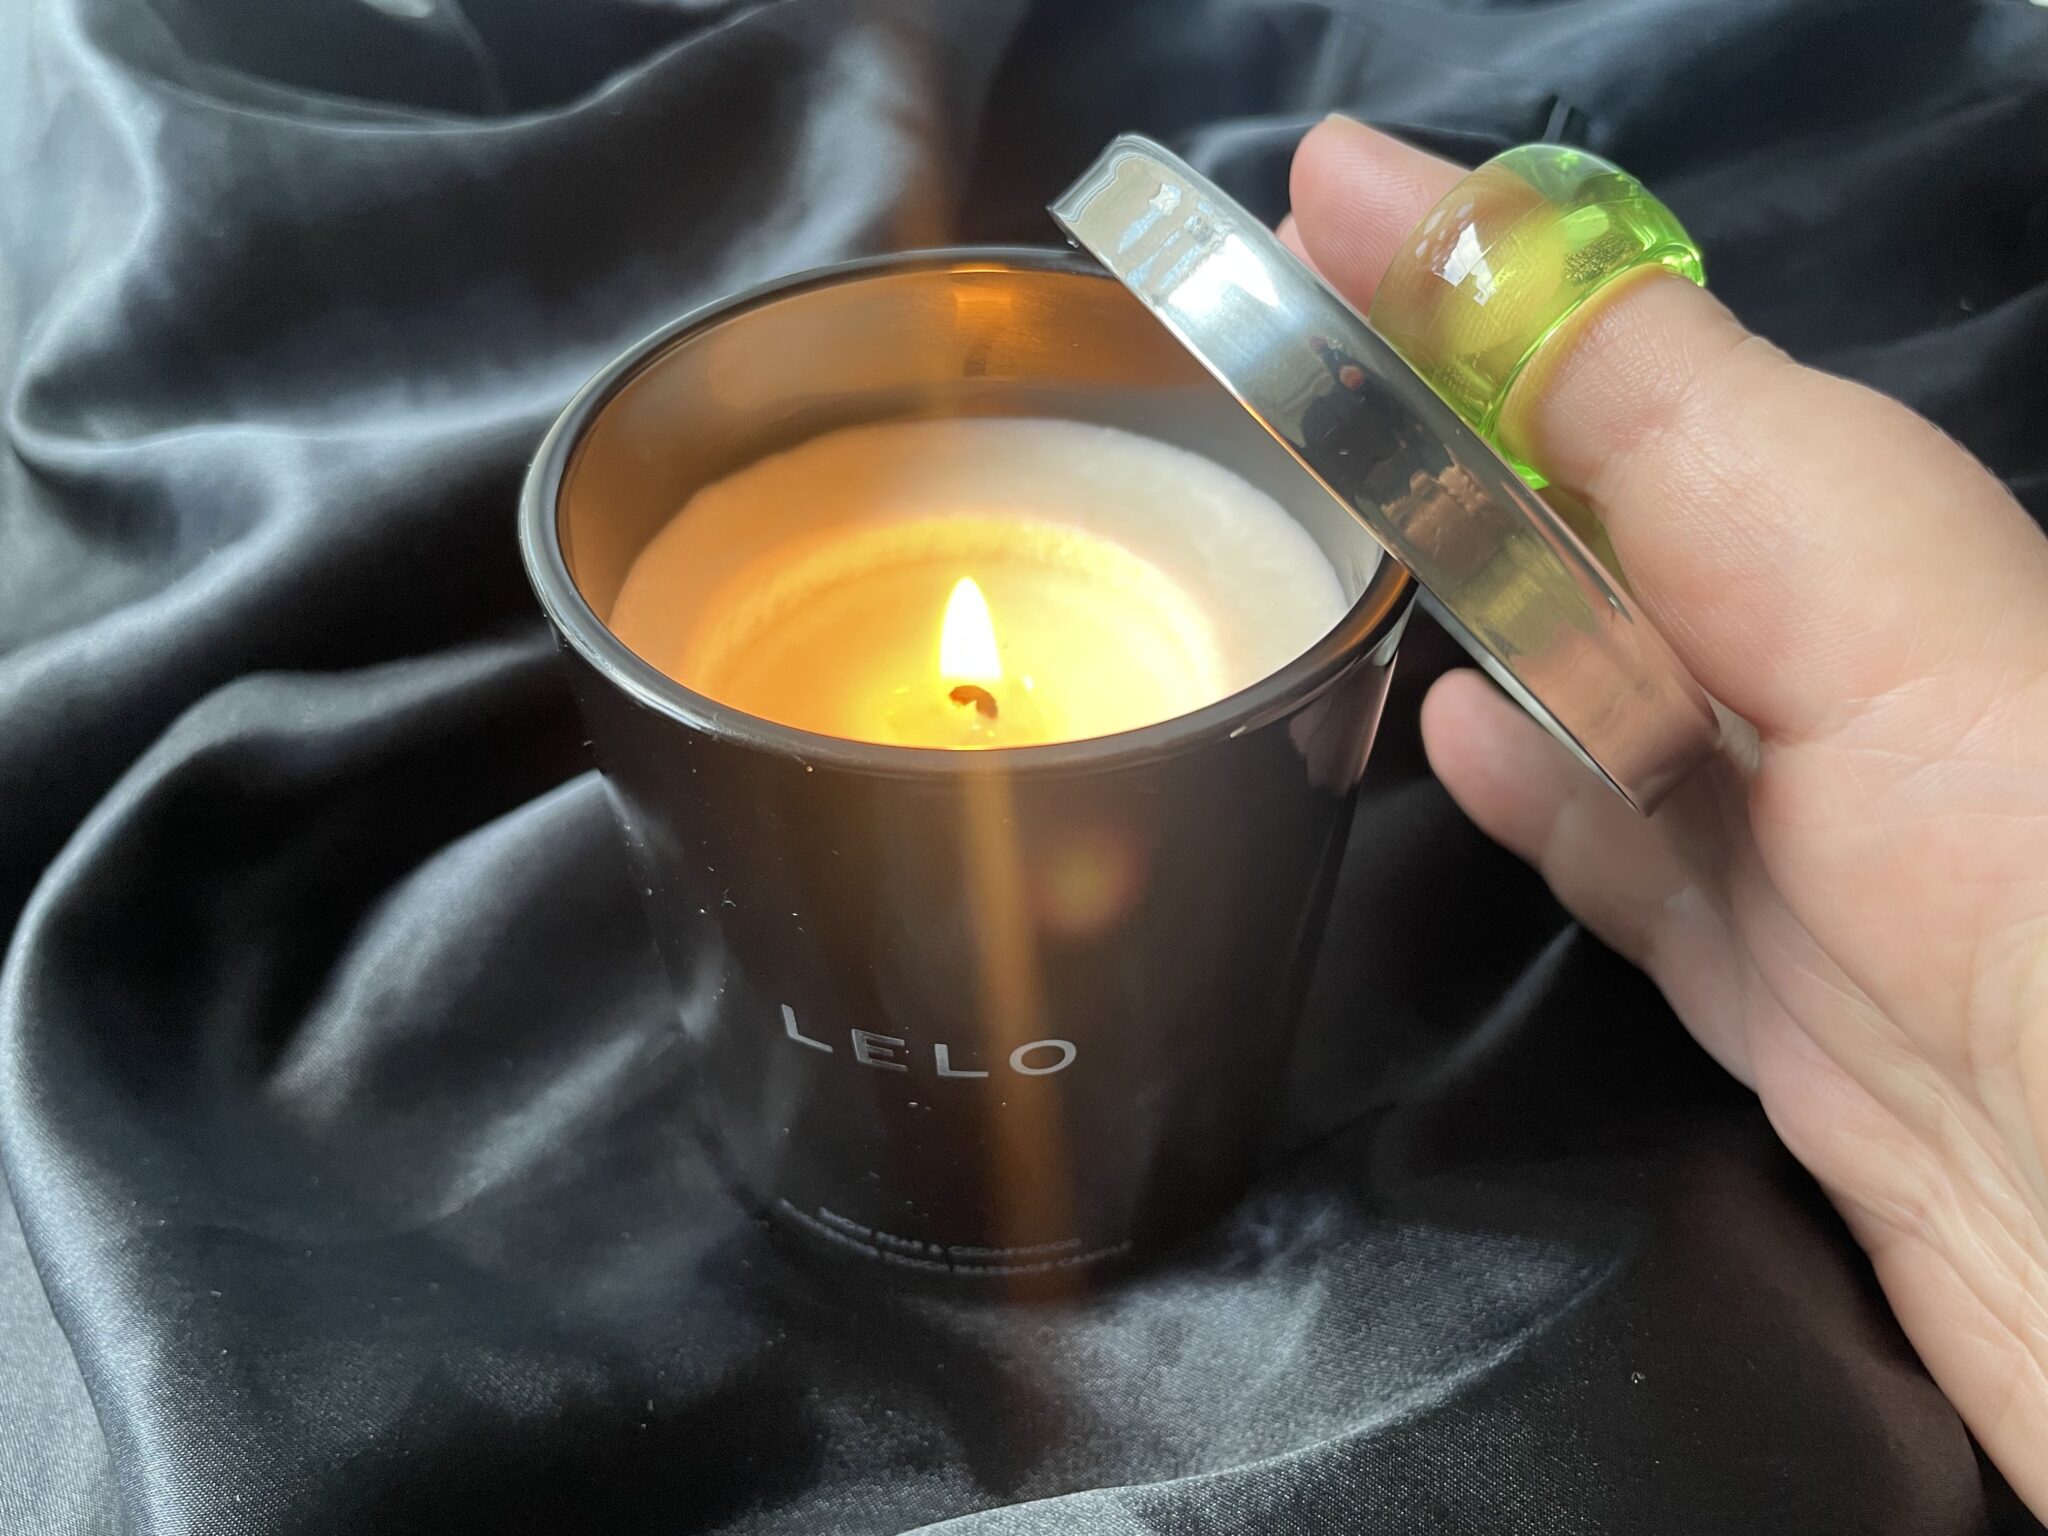 My Personal Experiences with LELO Flickering Touch Massage Candle